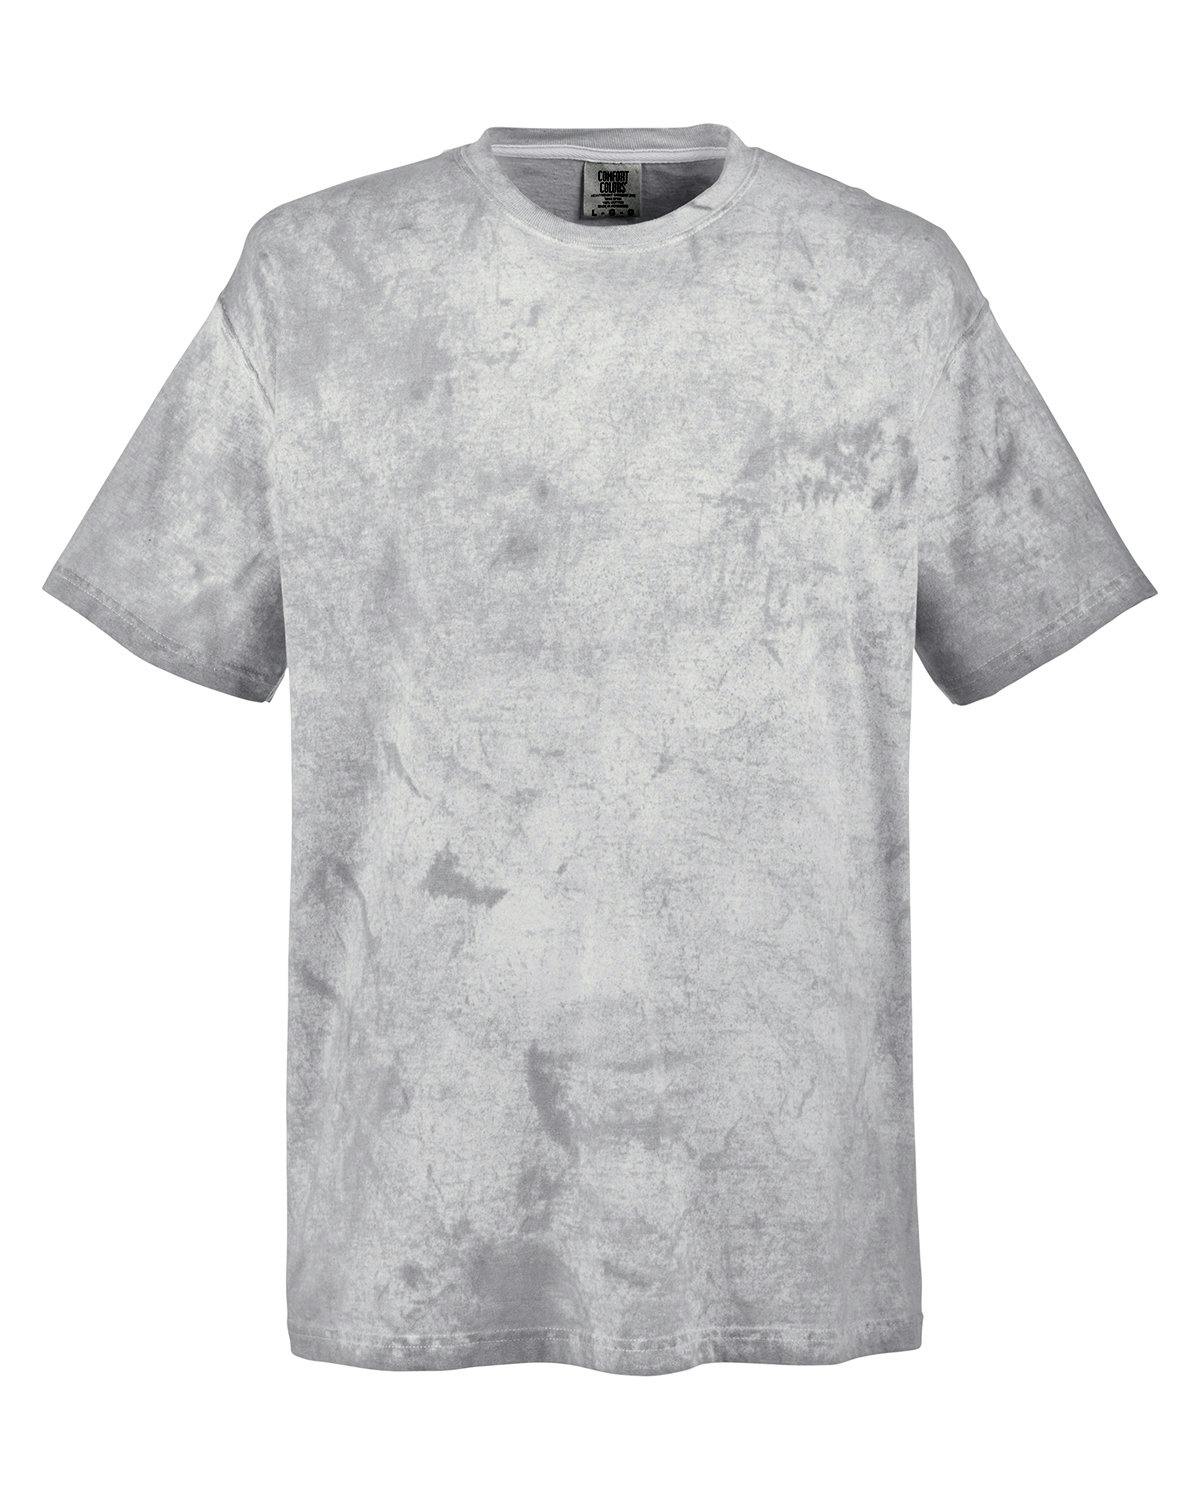 Image for Adult Heavyweight Color Blast T-Shirt